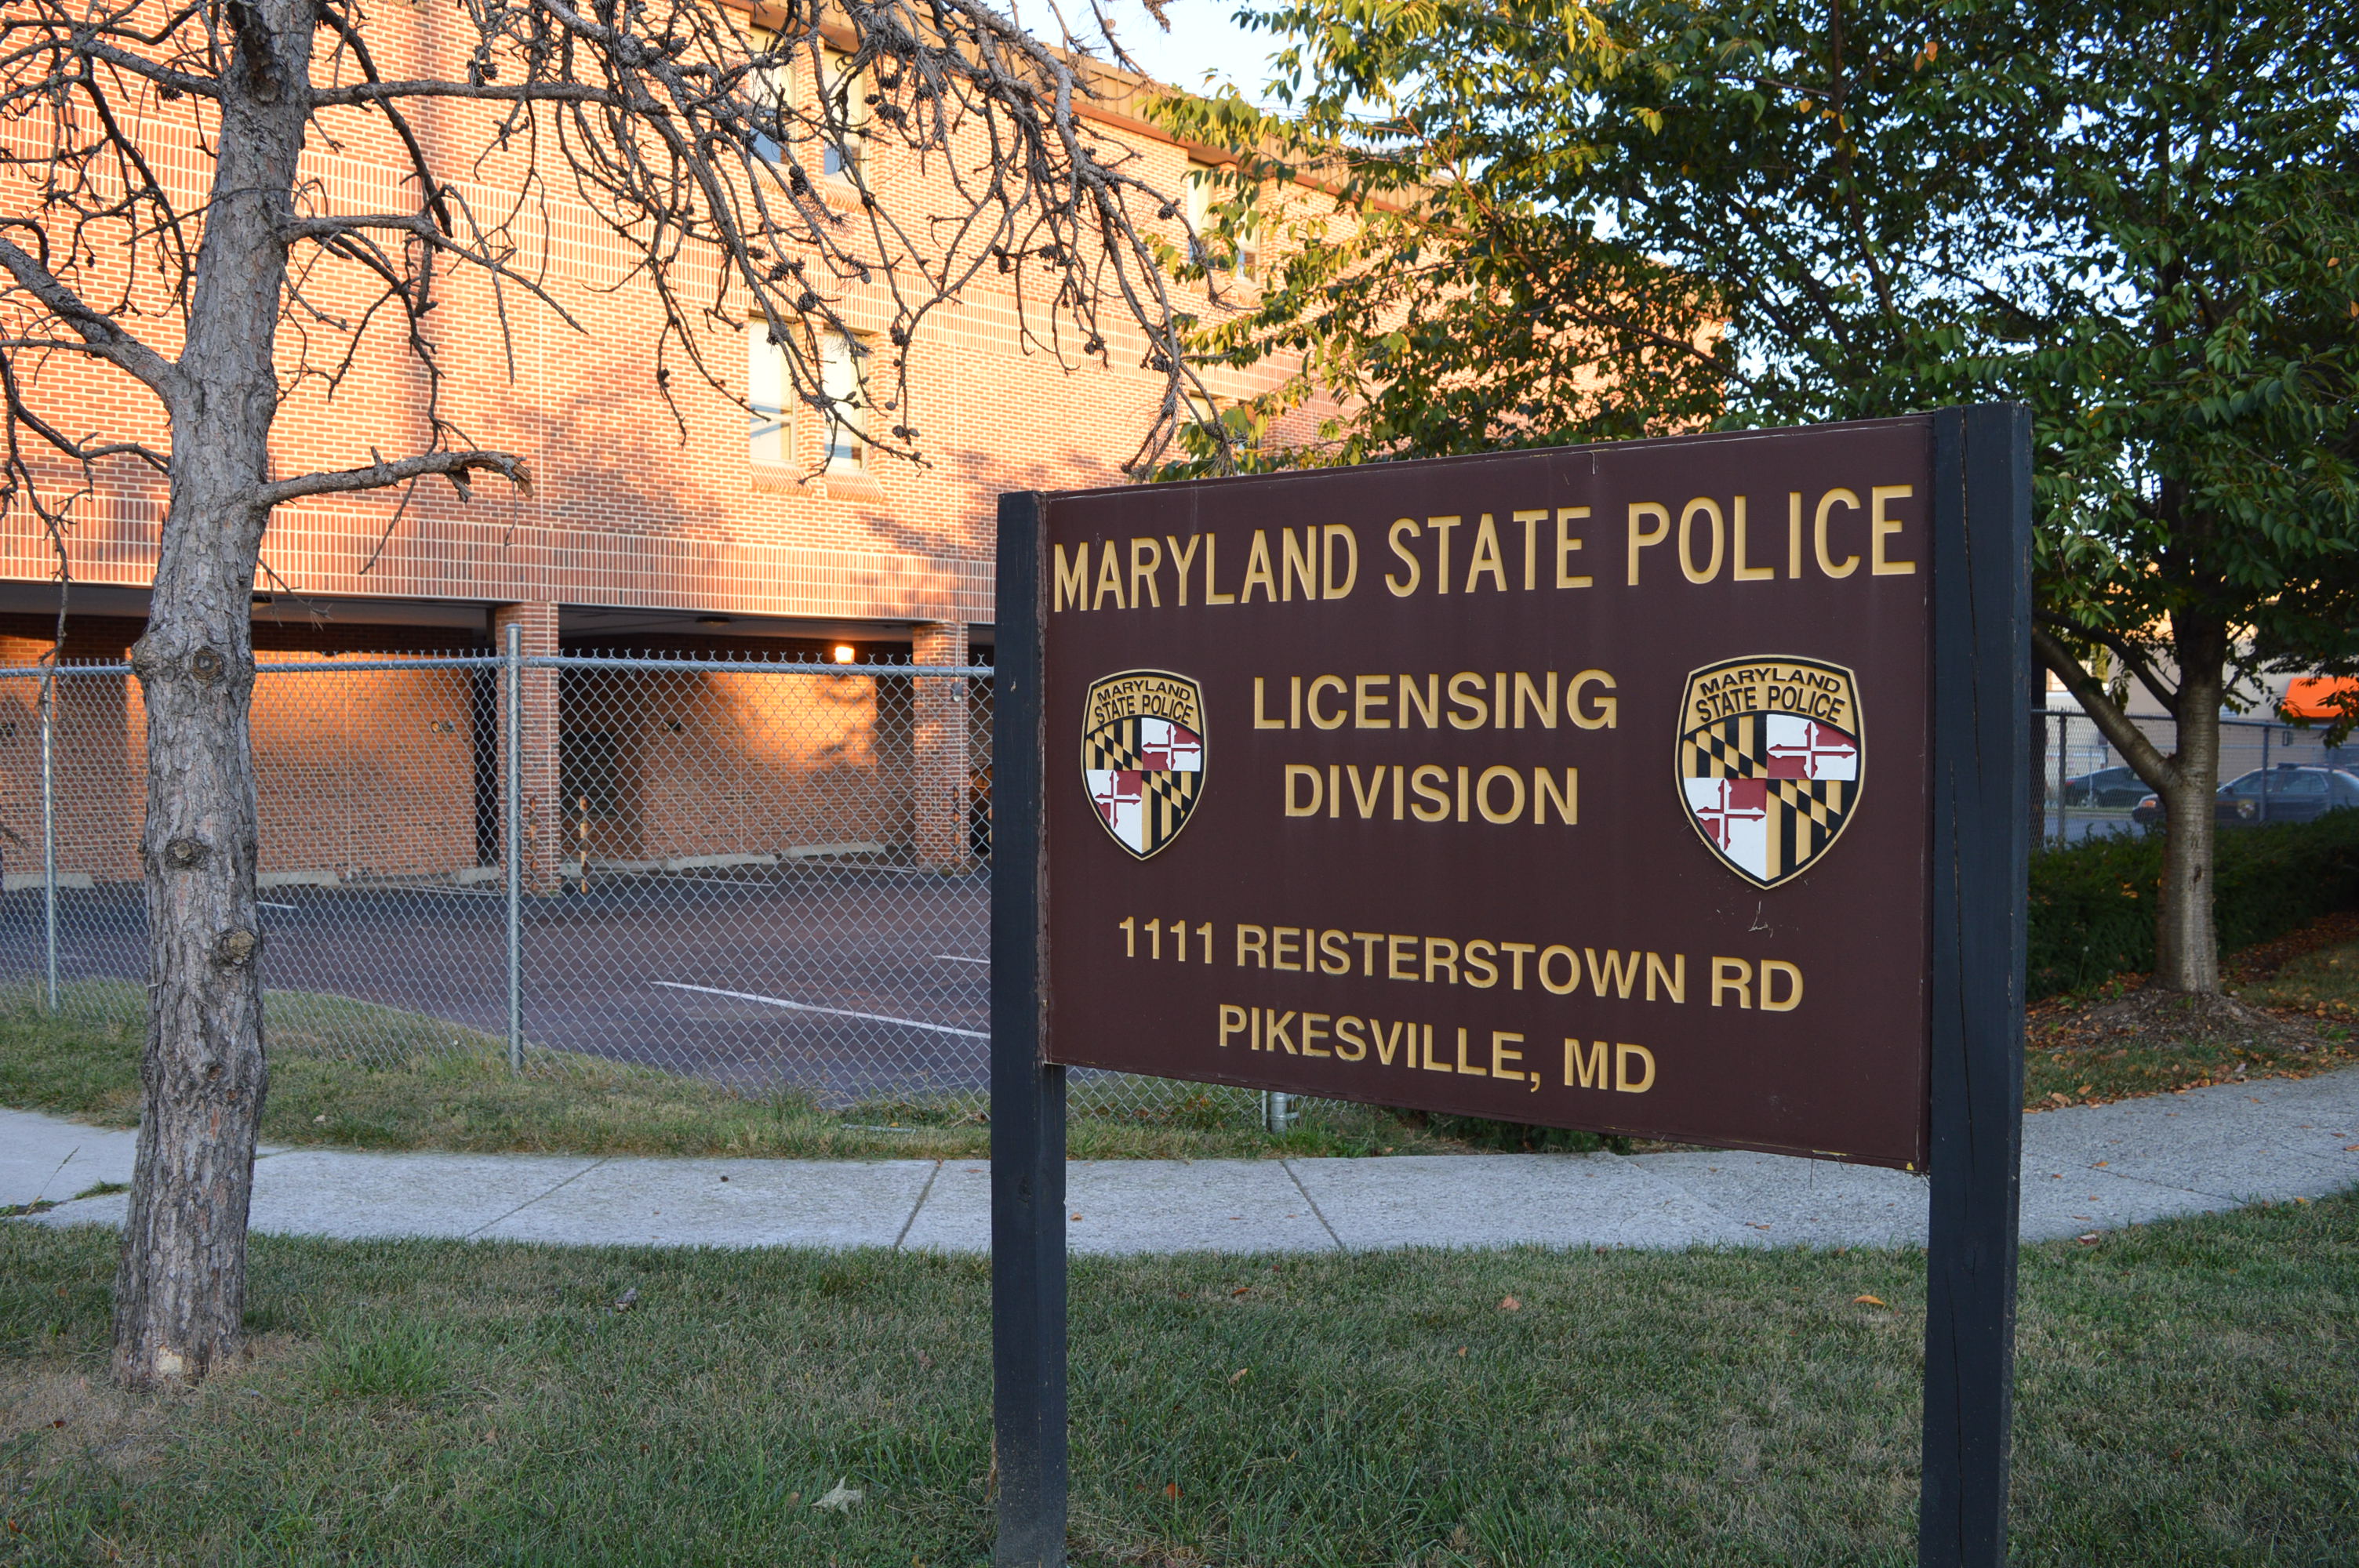 Maryland State Police Licensing Division. (Anthony C. Hayes)